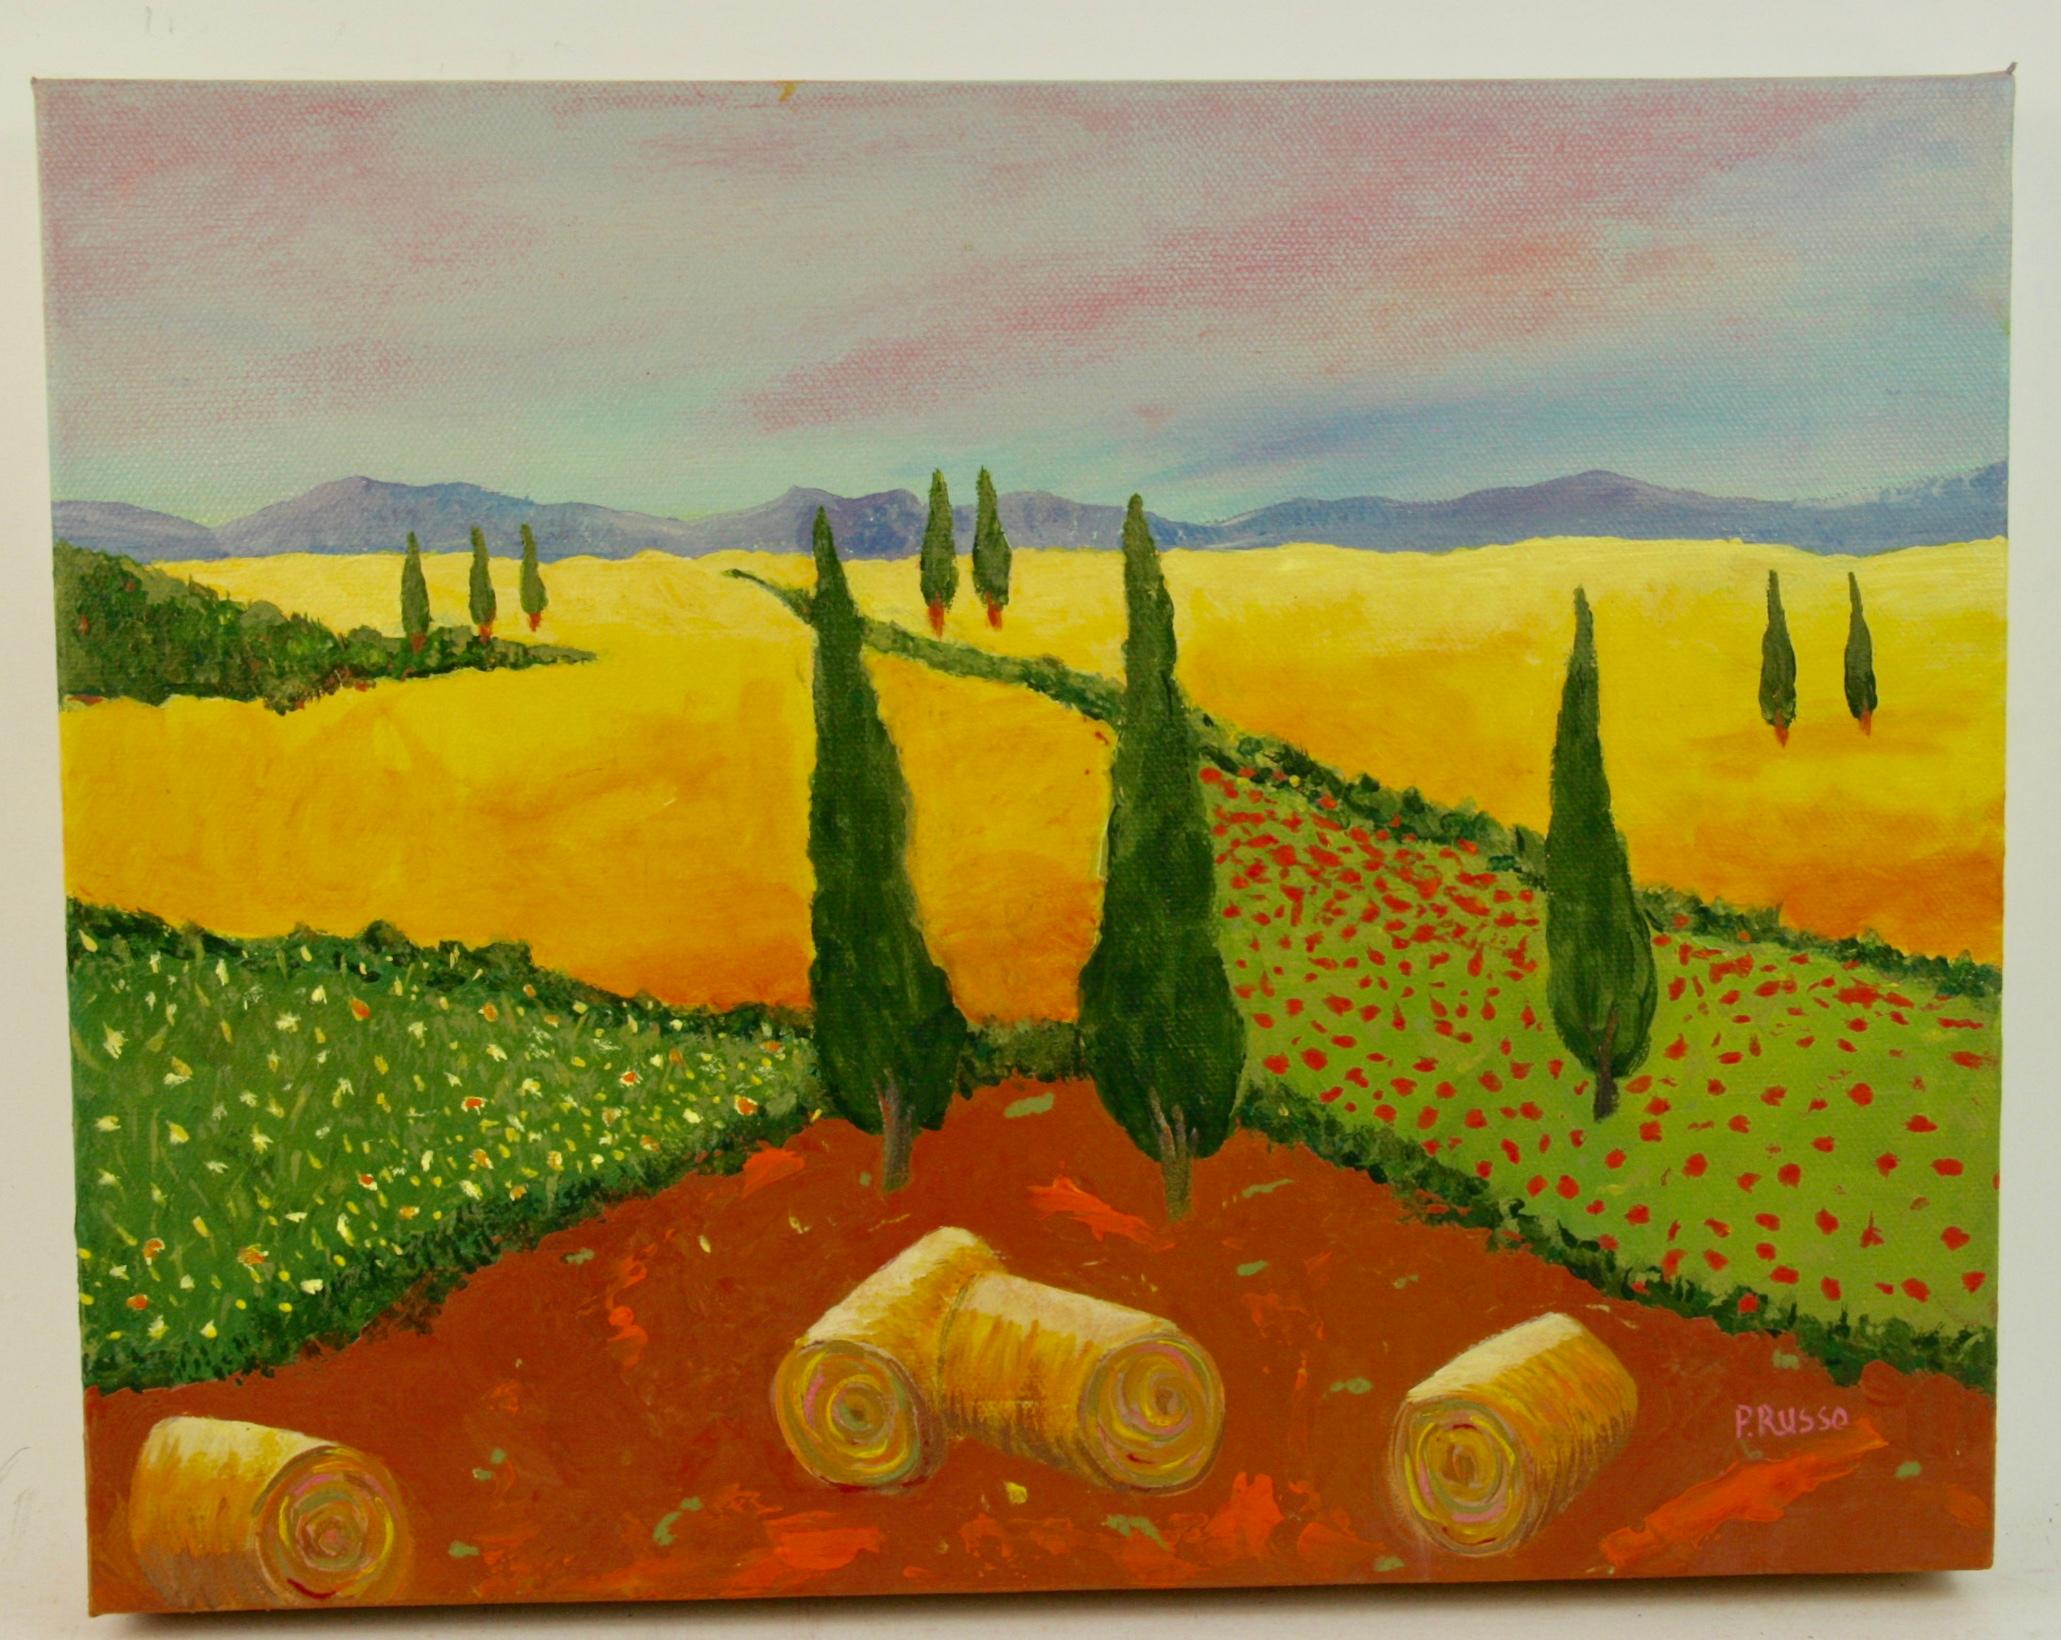 5-3481 Acrylic on rapped canvas
Depicting a Tuscan landscape
Signed P.Russo